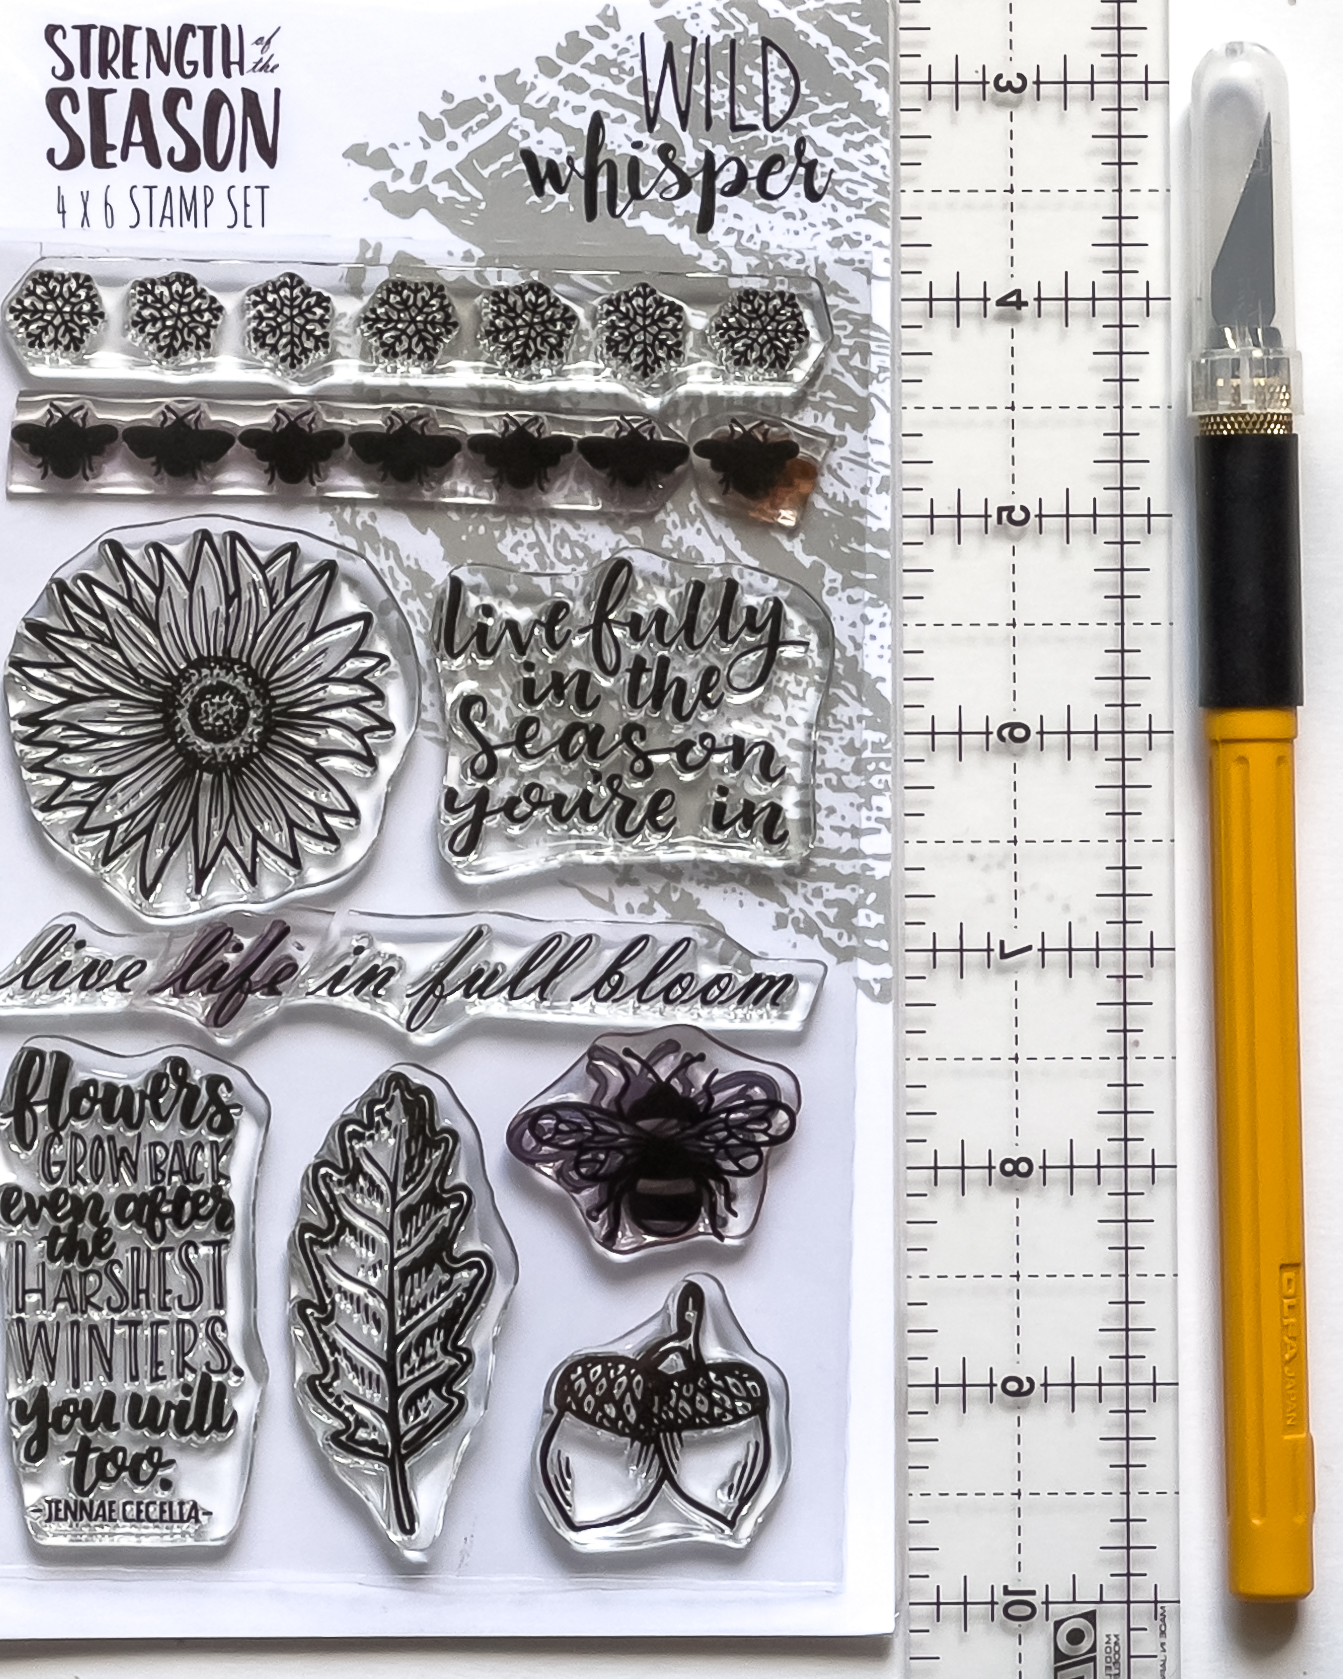 Scrapbooking with an Olfa knife and ruler